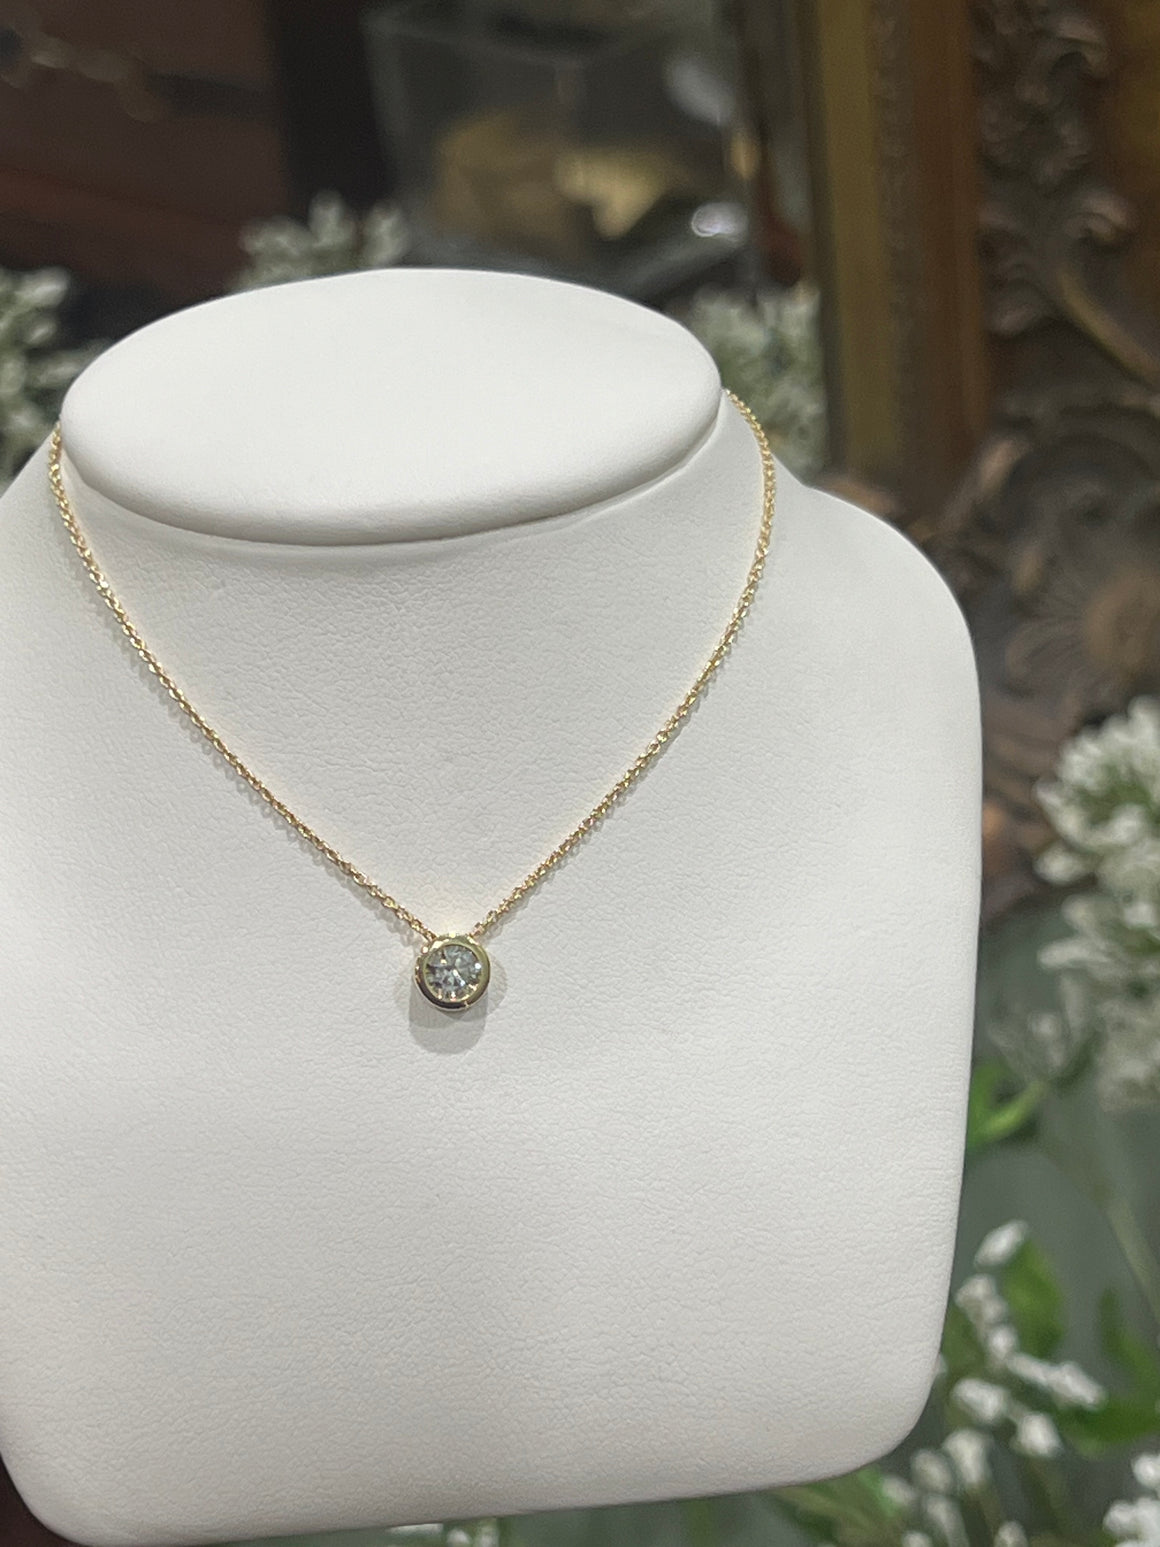 Solitaire Diamond Necklace in 18ct Yellow Gold - Round 0.40